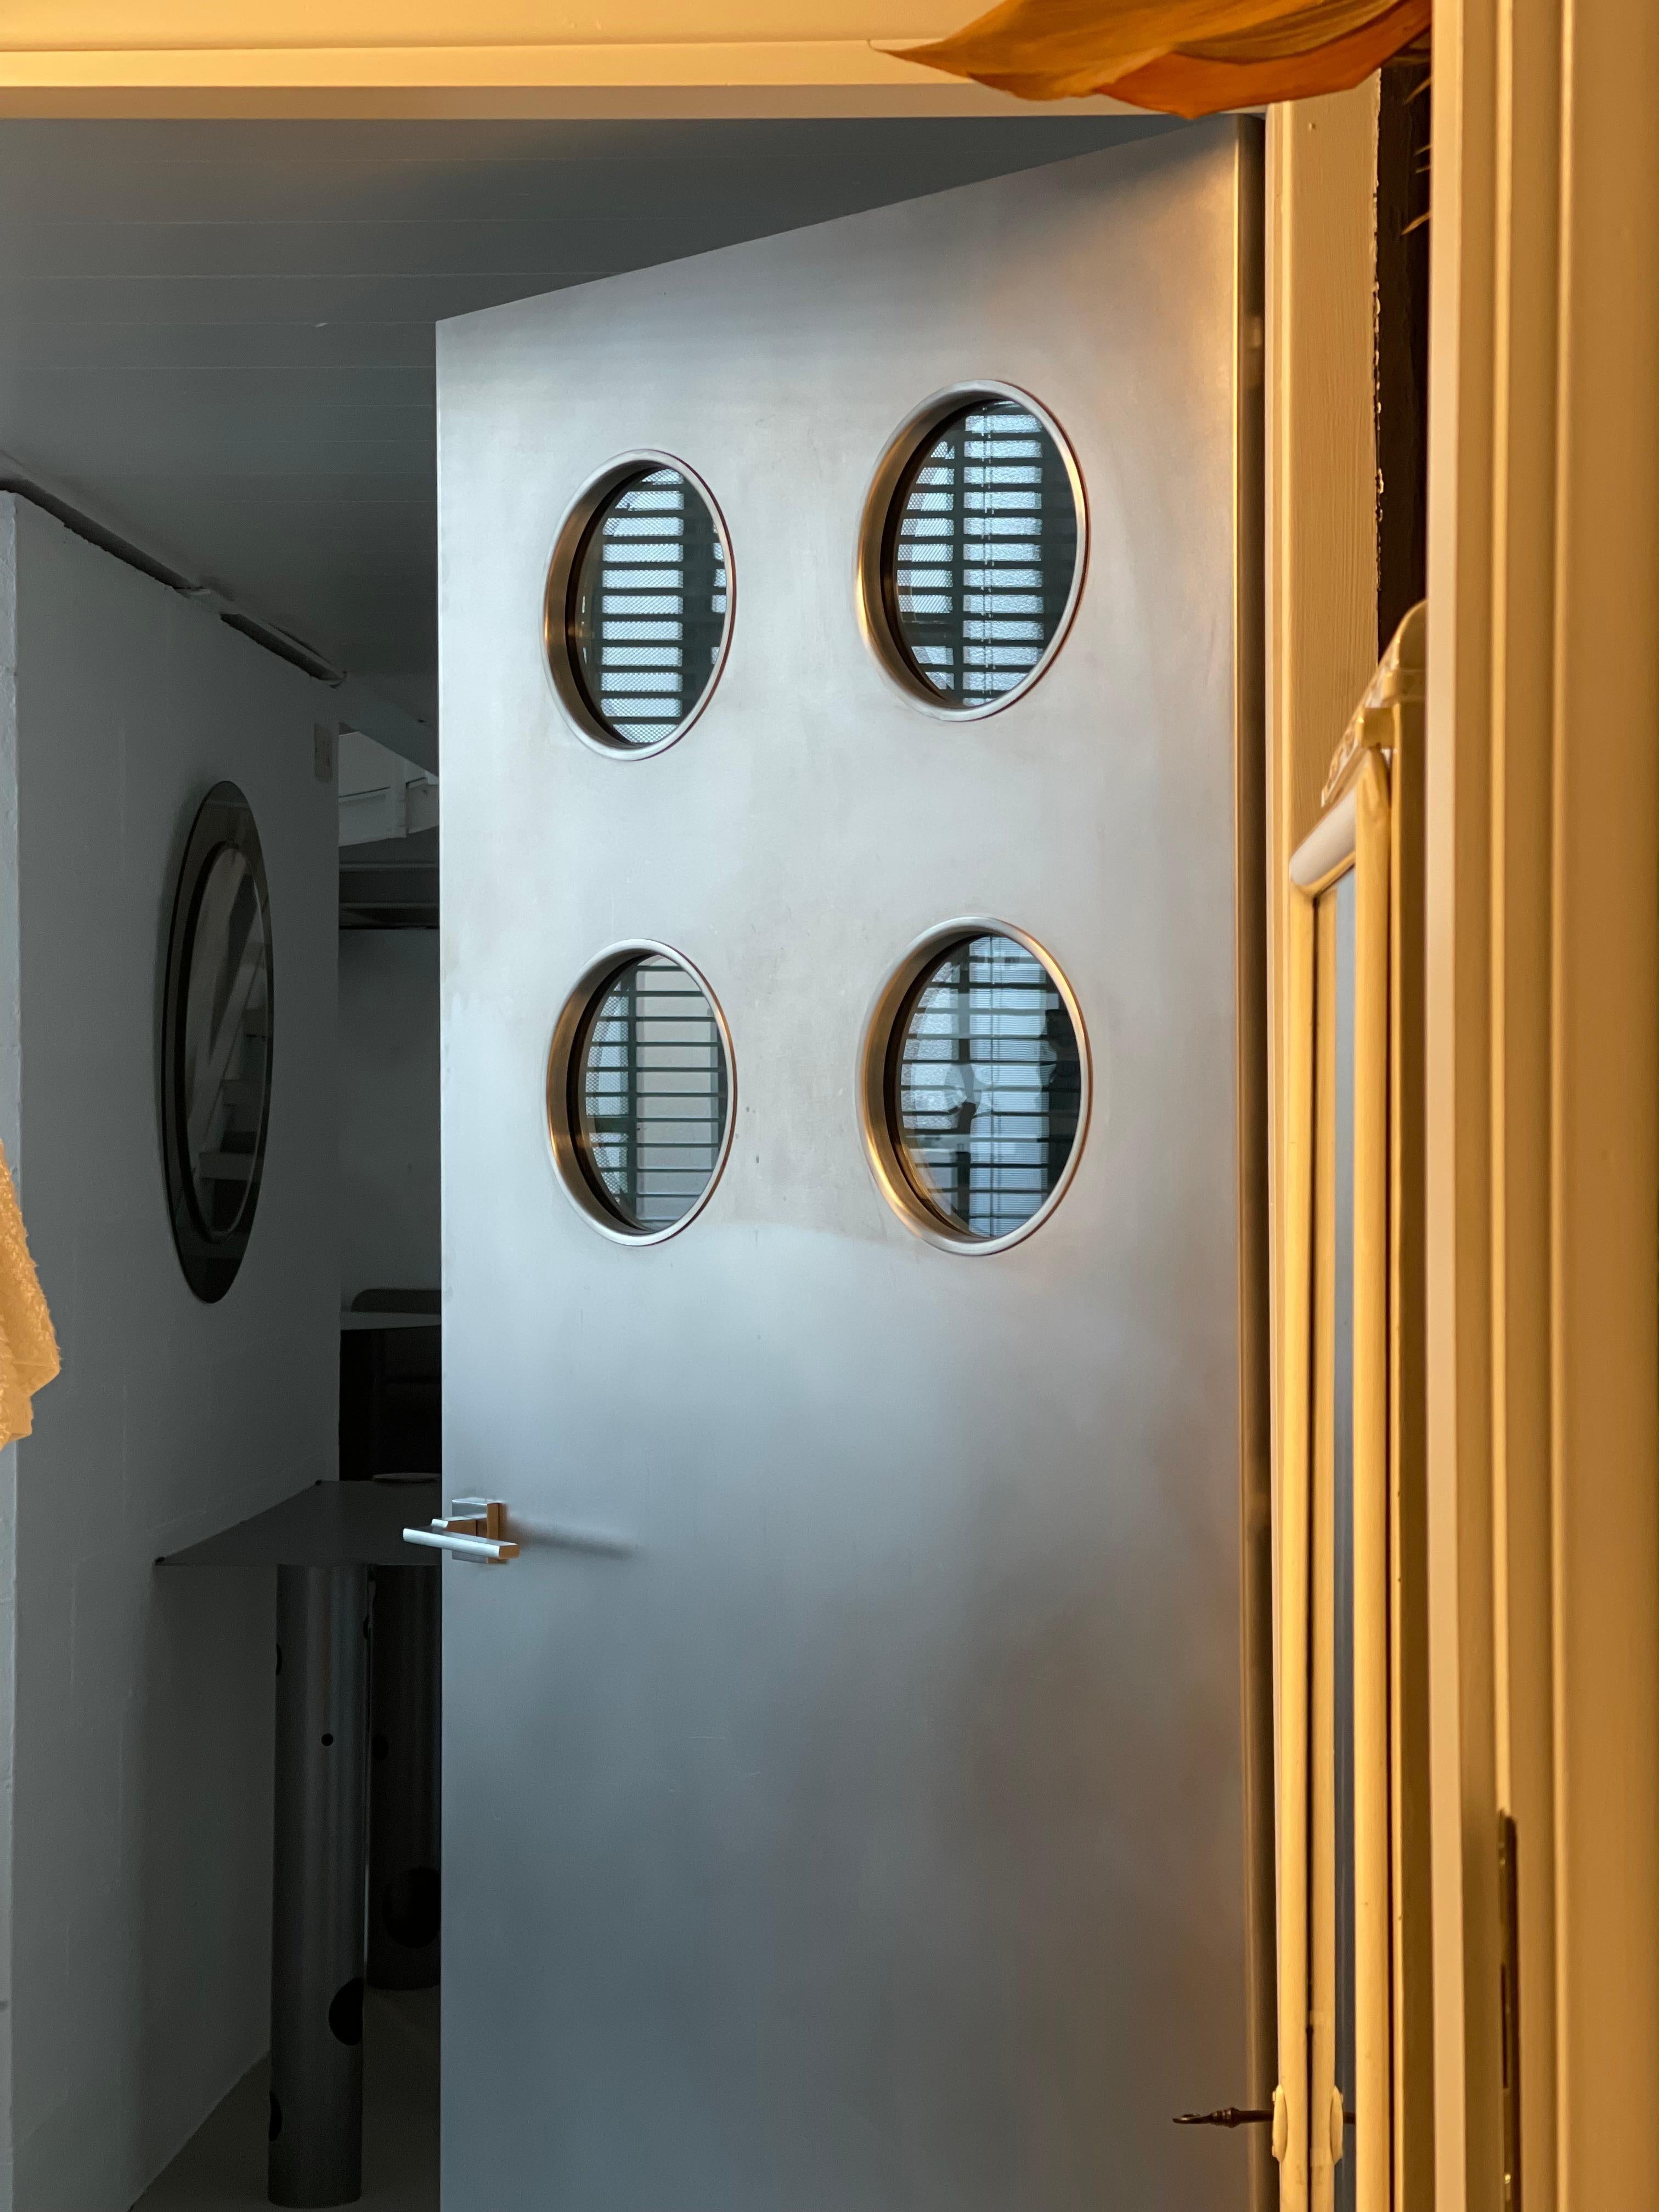 Contemporary custom made stainless steel metal door with round portholes, designed by Spinzi and made in Italy.

Inspired by the works of Jean Prouvé, this door is built around an existing regular wood door, with the addition of round porthole